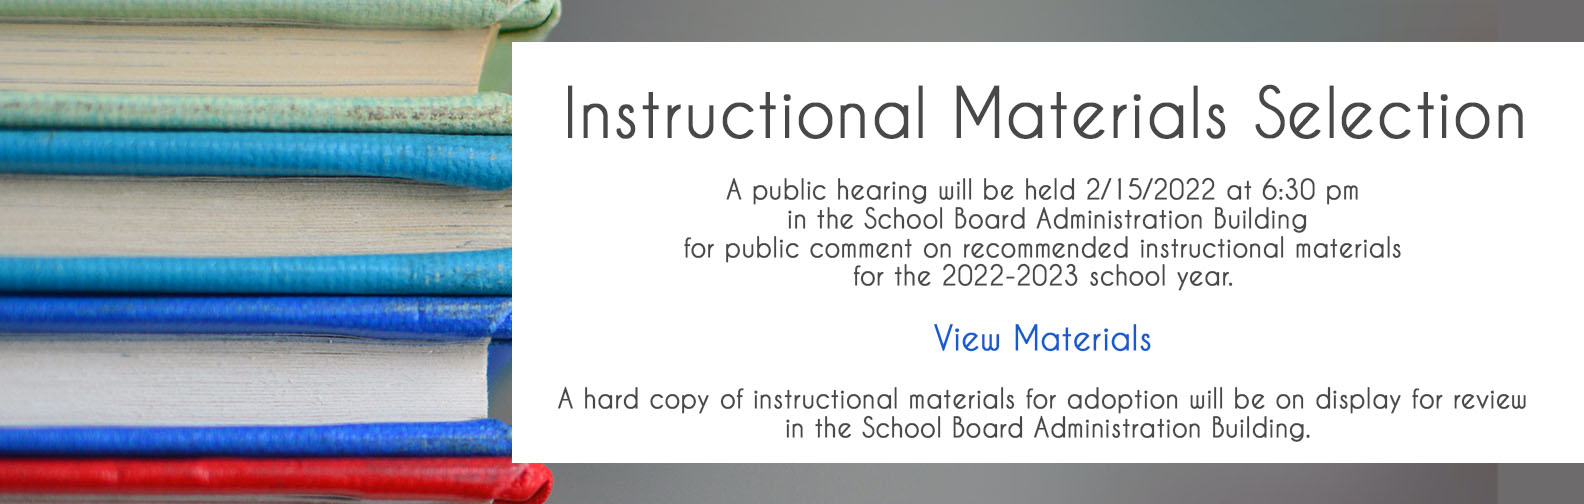 A public hearing will be held 2/15/2022 at 6:30 pm in the School Board Administration Building for public comment on recommended instructional materials for the 2022-2023 school year. Click here to view materials.  A hard copy of instructional materials for adoption will be on display for review in the School Board Administration Building.